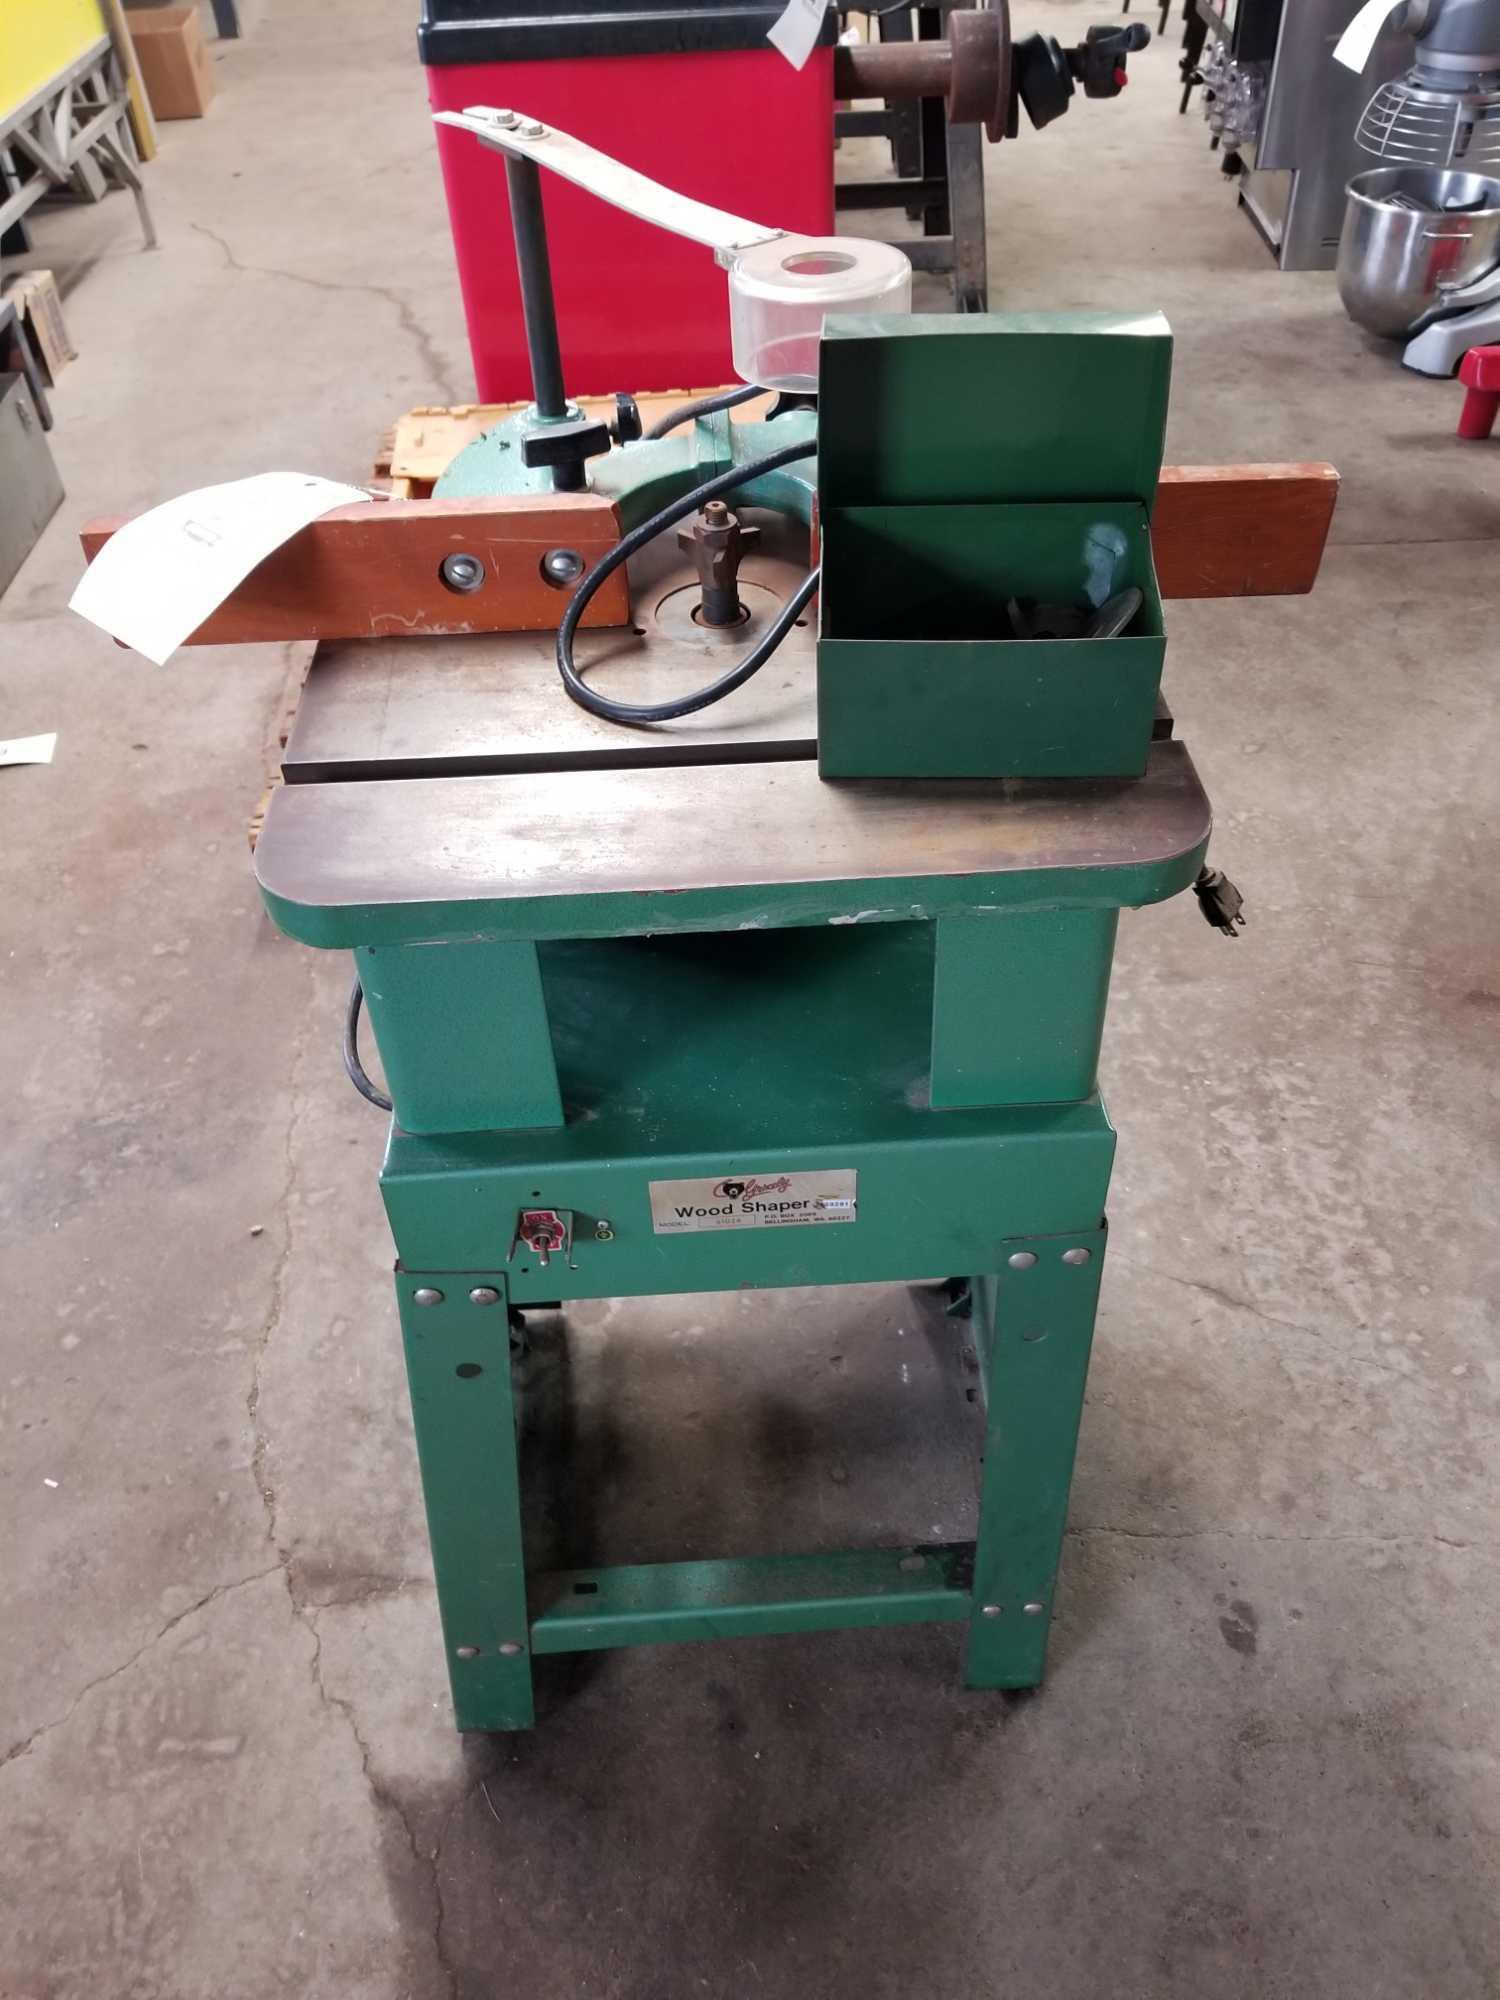 Grizzly wood shaper with bits. Model G1024